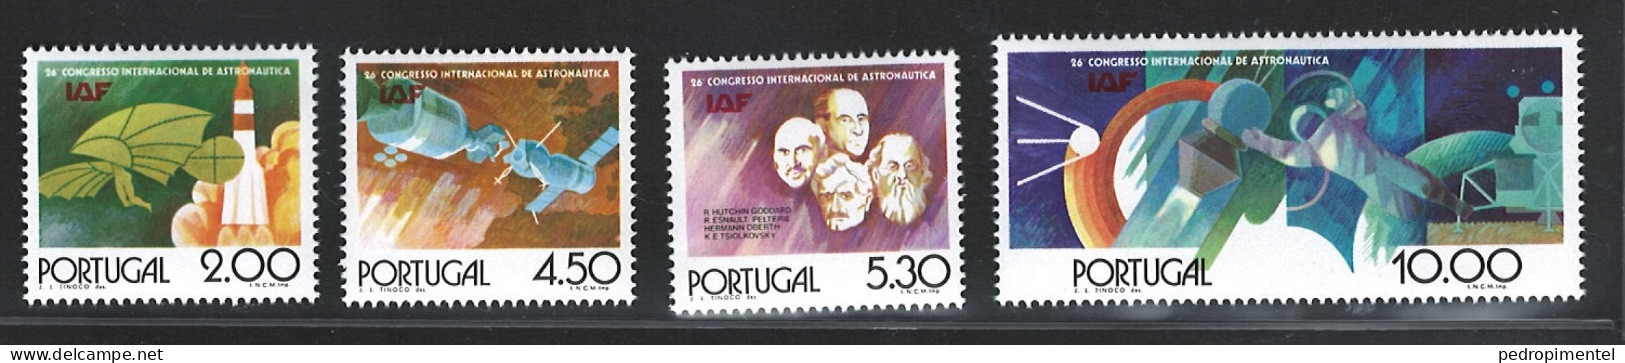 Portugal Stamps 1975 "International Astronautical Federation" Condition MNH #1261-1264 - Nuovi